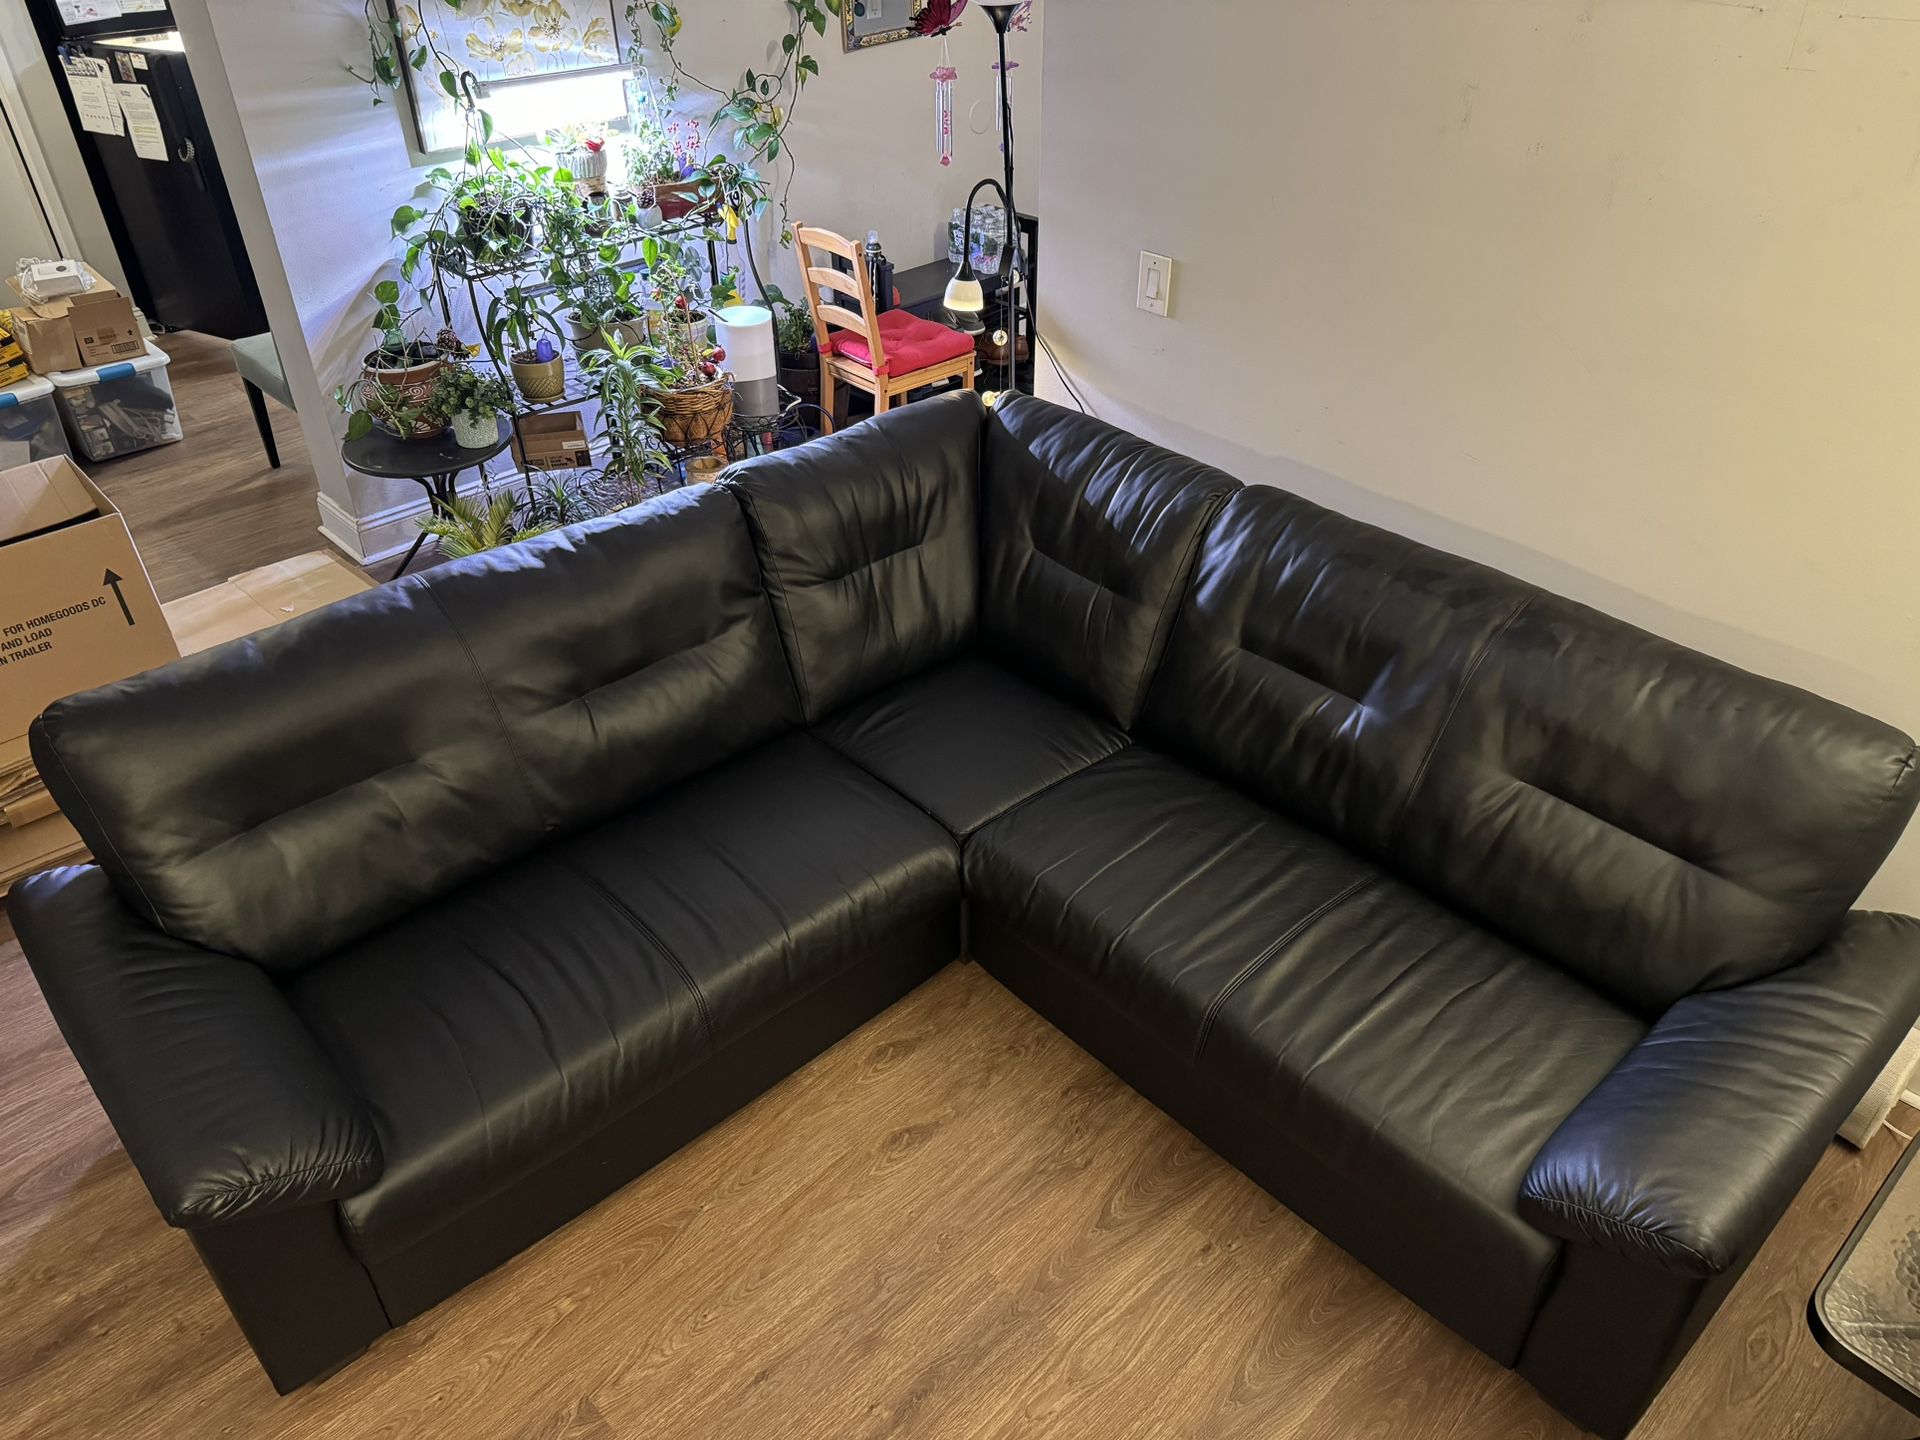 IKEA sectional couch (black leather) + IKEA Coffee table (black)